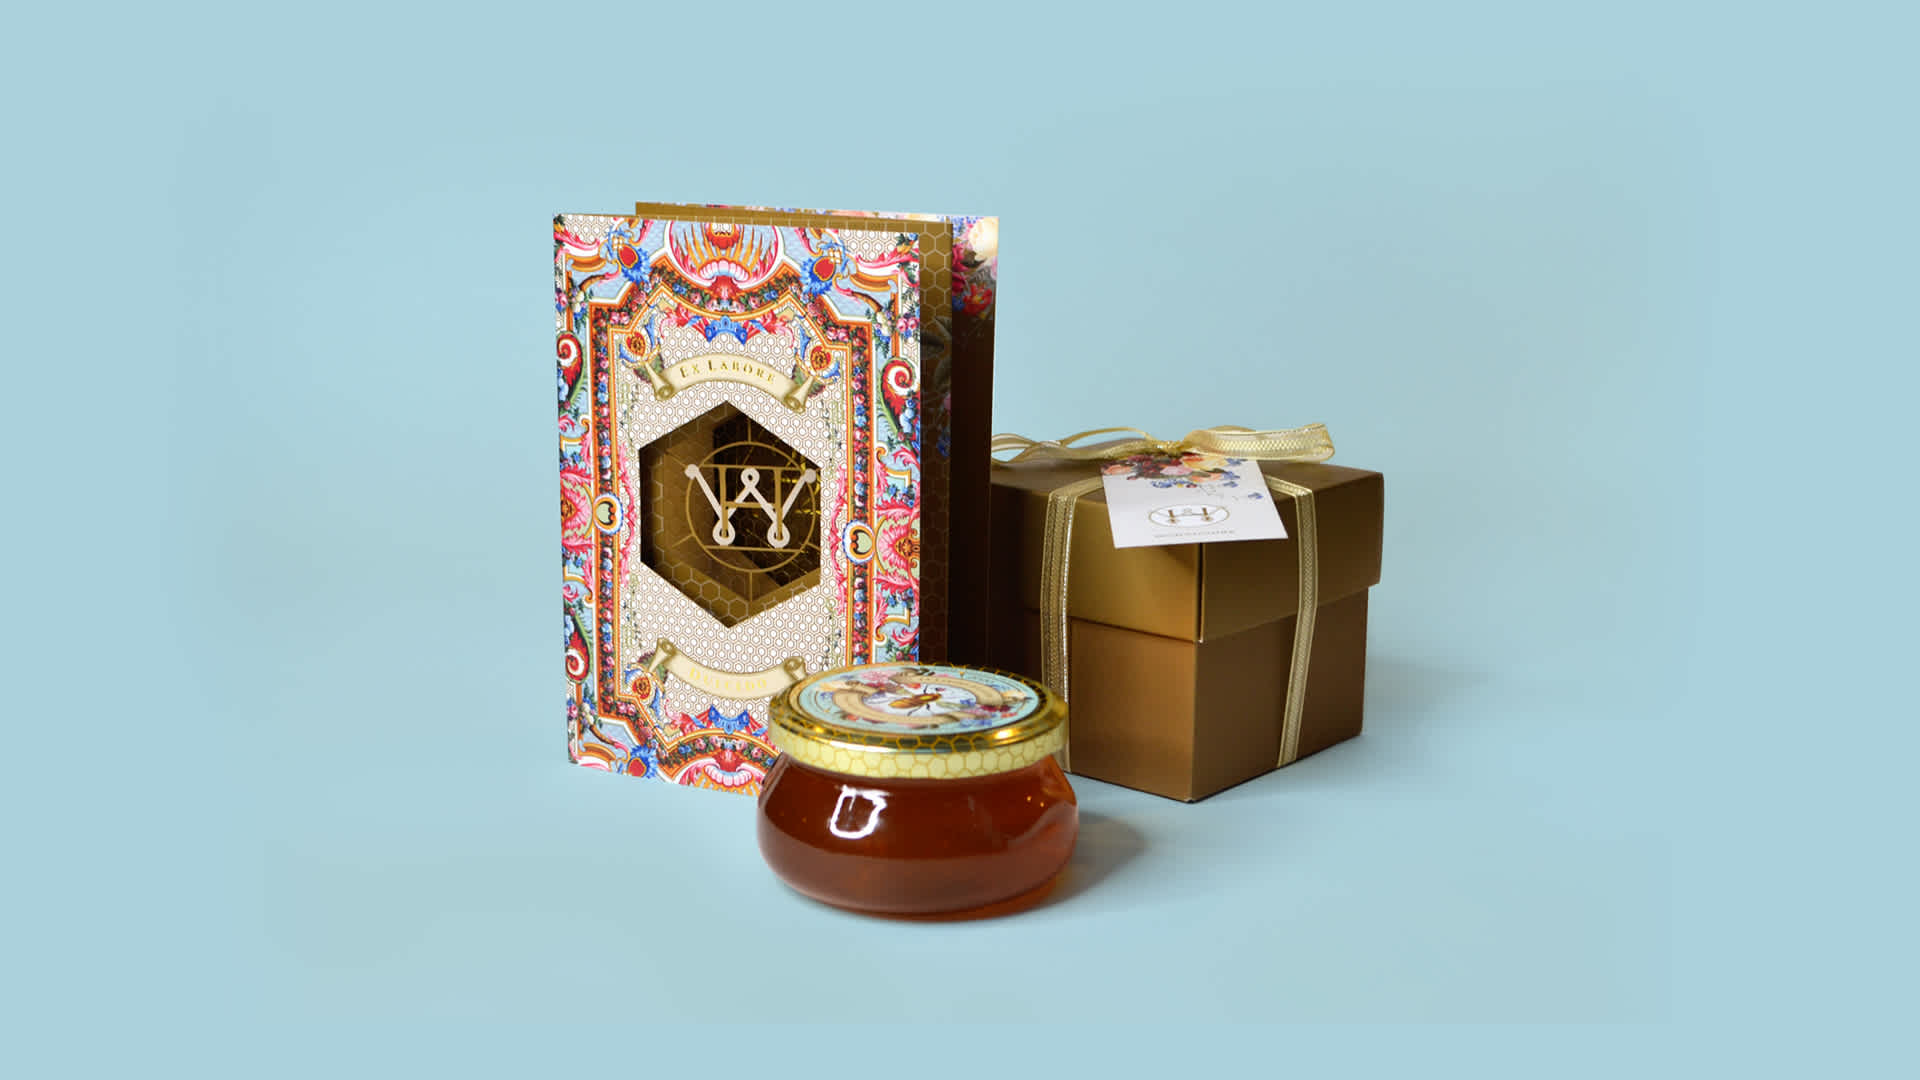 Workhouse Holiday 2020 Honey, Card, and Packaging campaign — Ex Labore Dulcedo  "From Work Comes Sweetness"